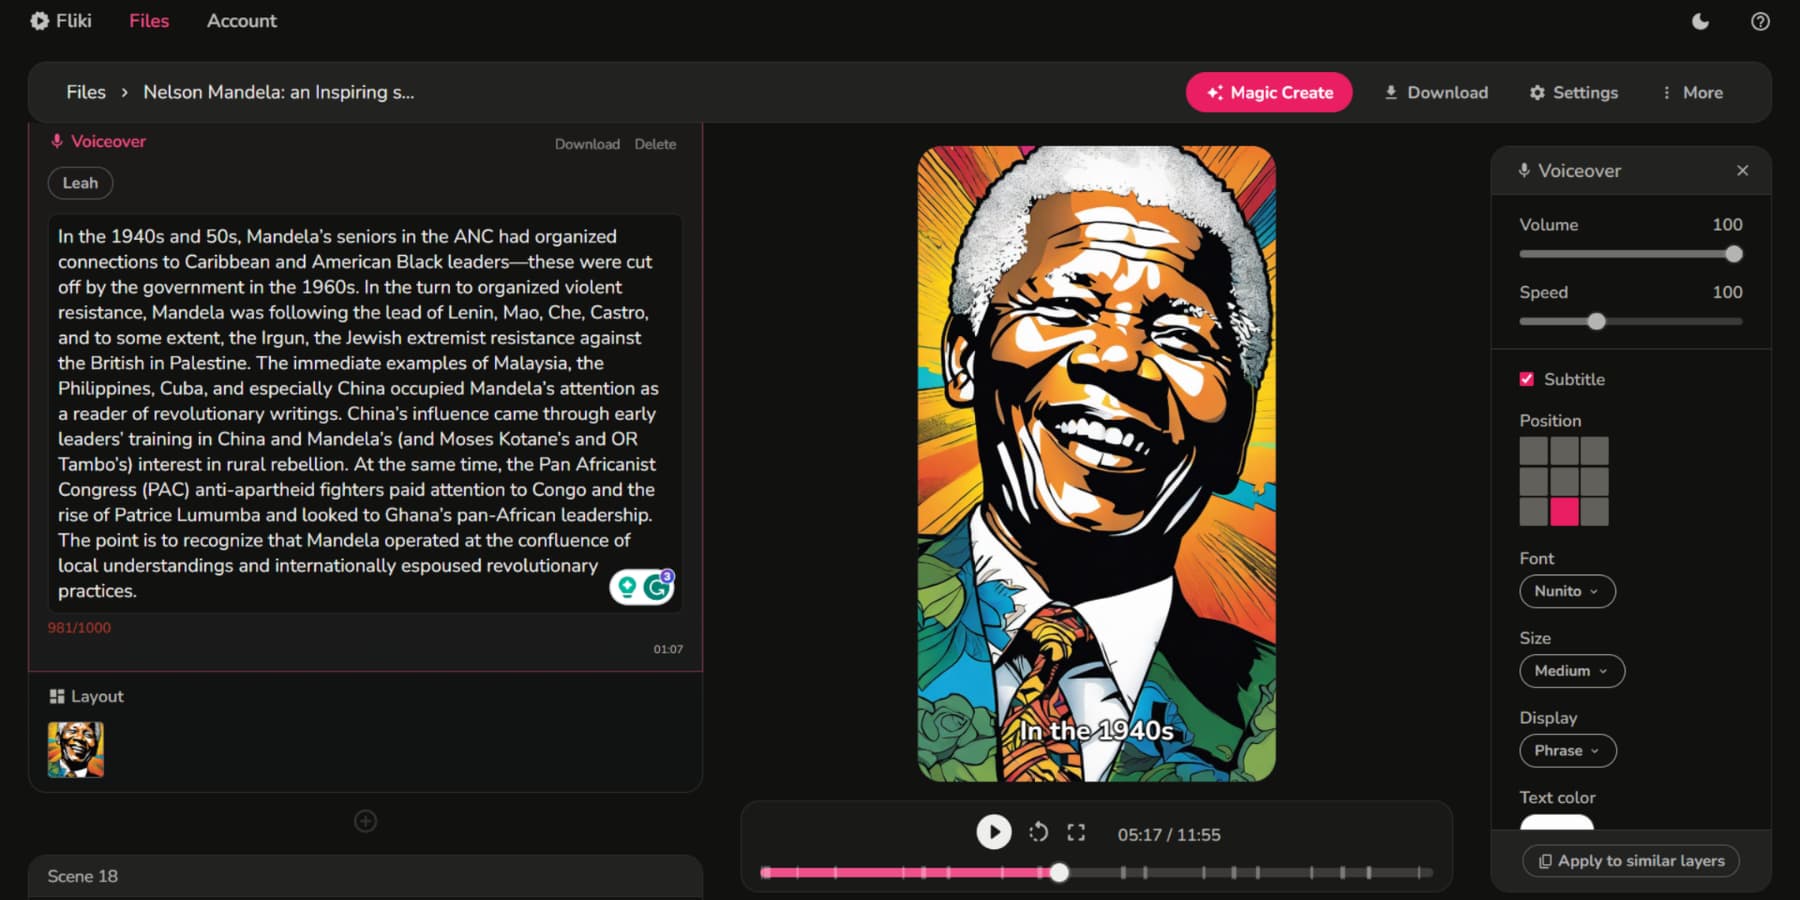 A screenshot of a video telling the story of Nelson Mandela being created using Fliki AI